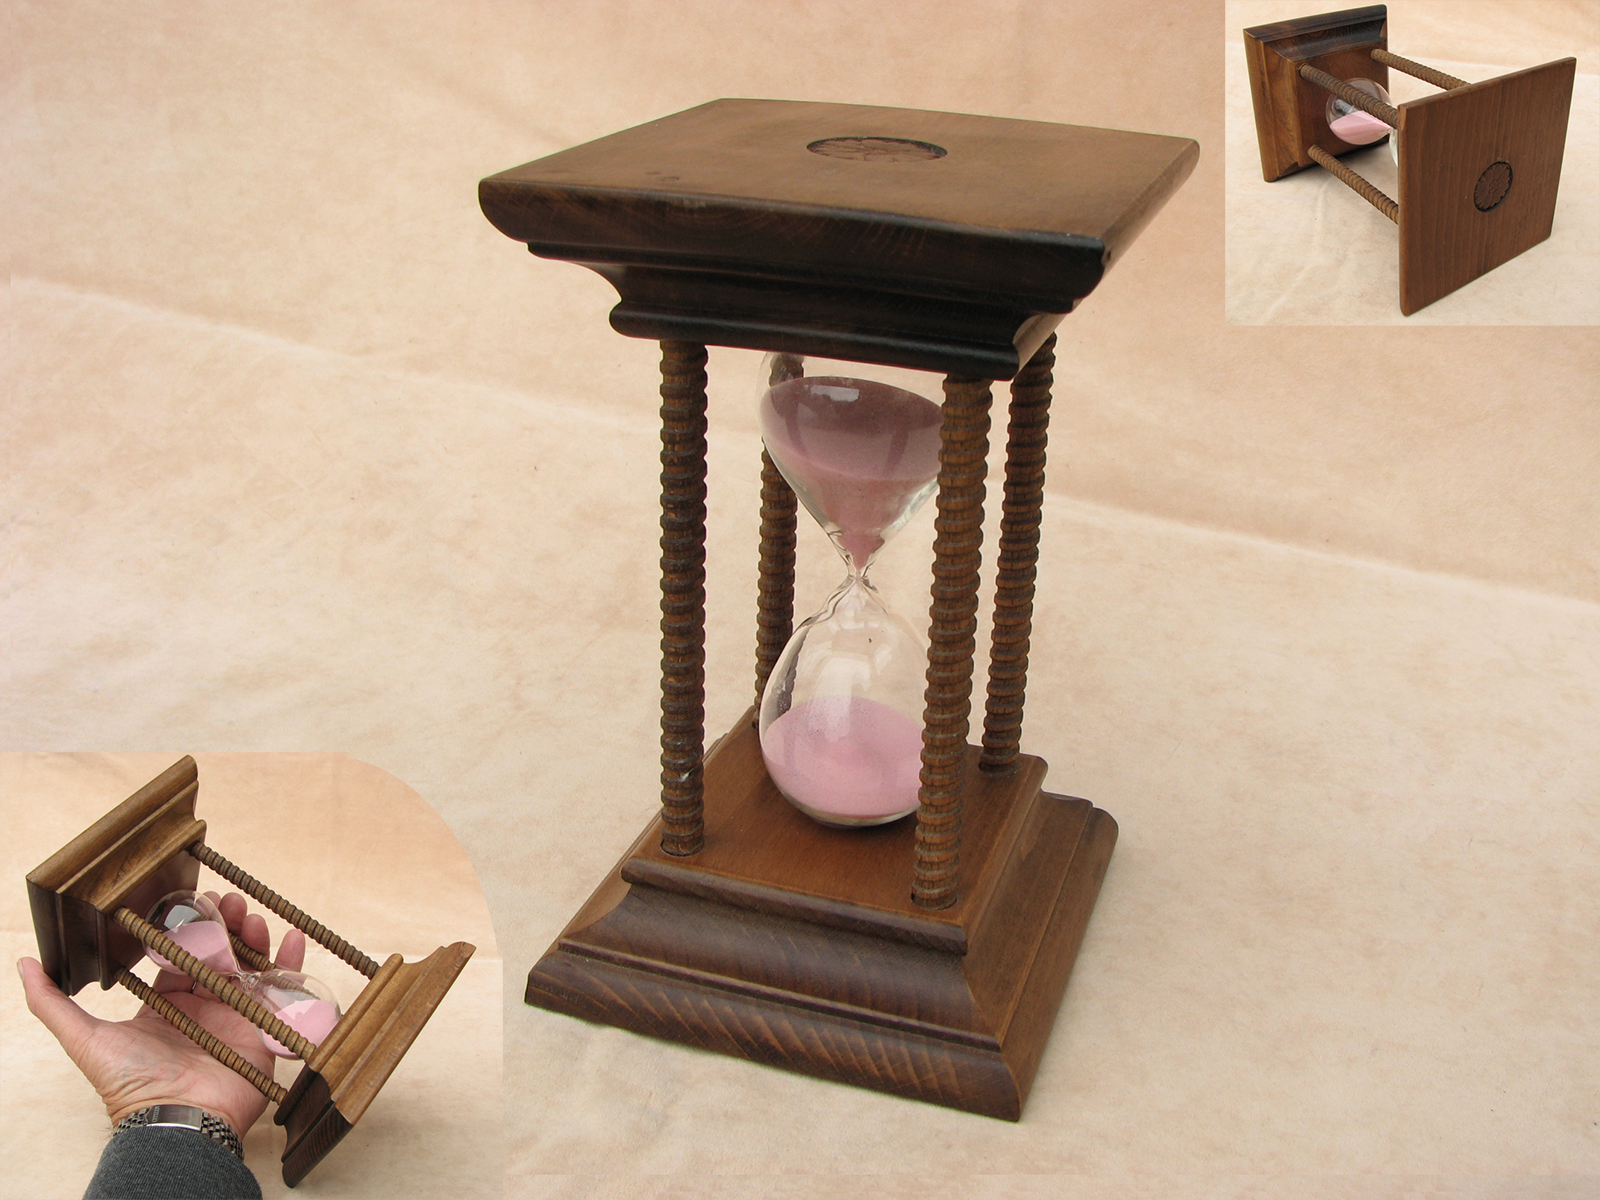 Early 20th Century sand timer with spiral pillars